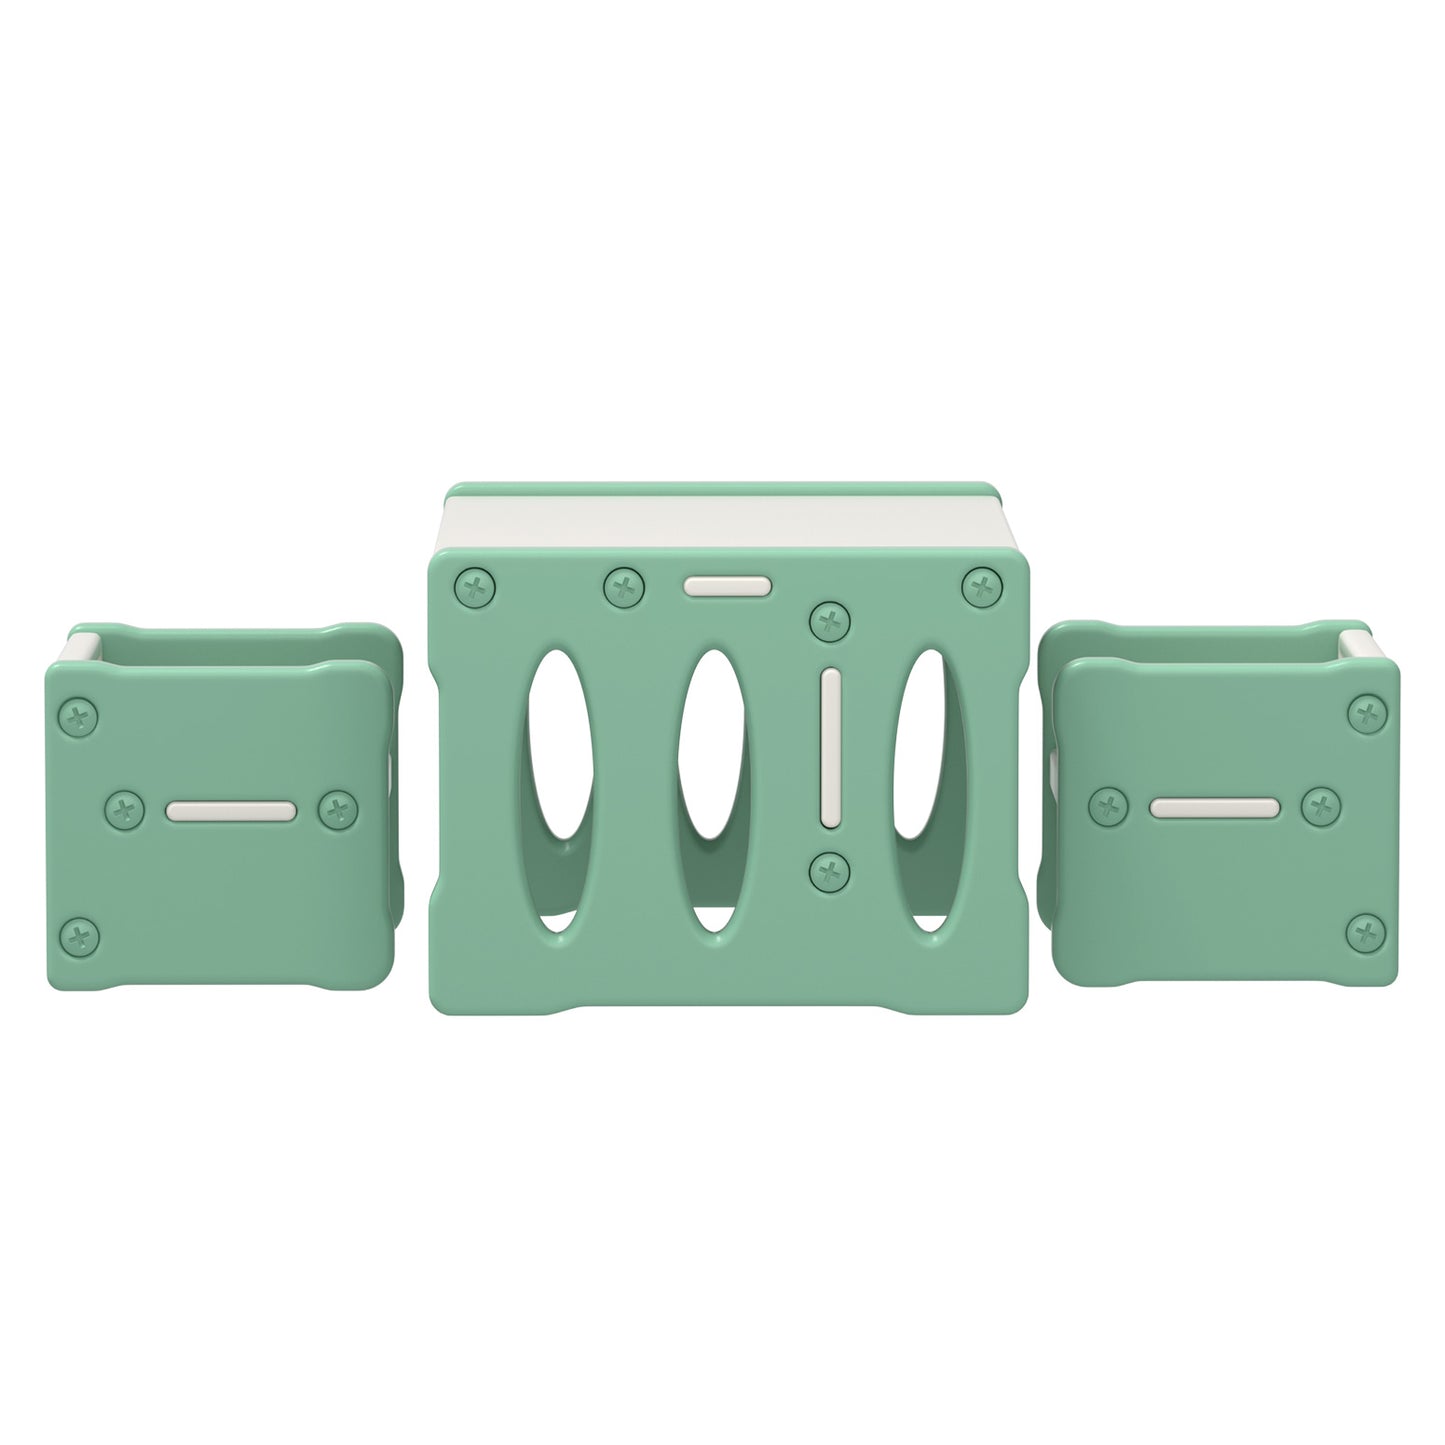 Pora 3-Piece Kids Table & Chairs Set Kids Table and Chairs Set - Green